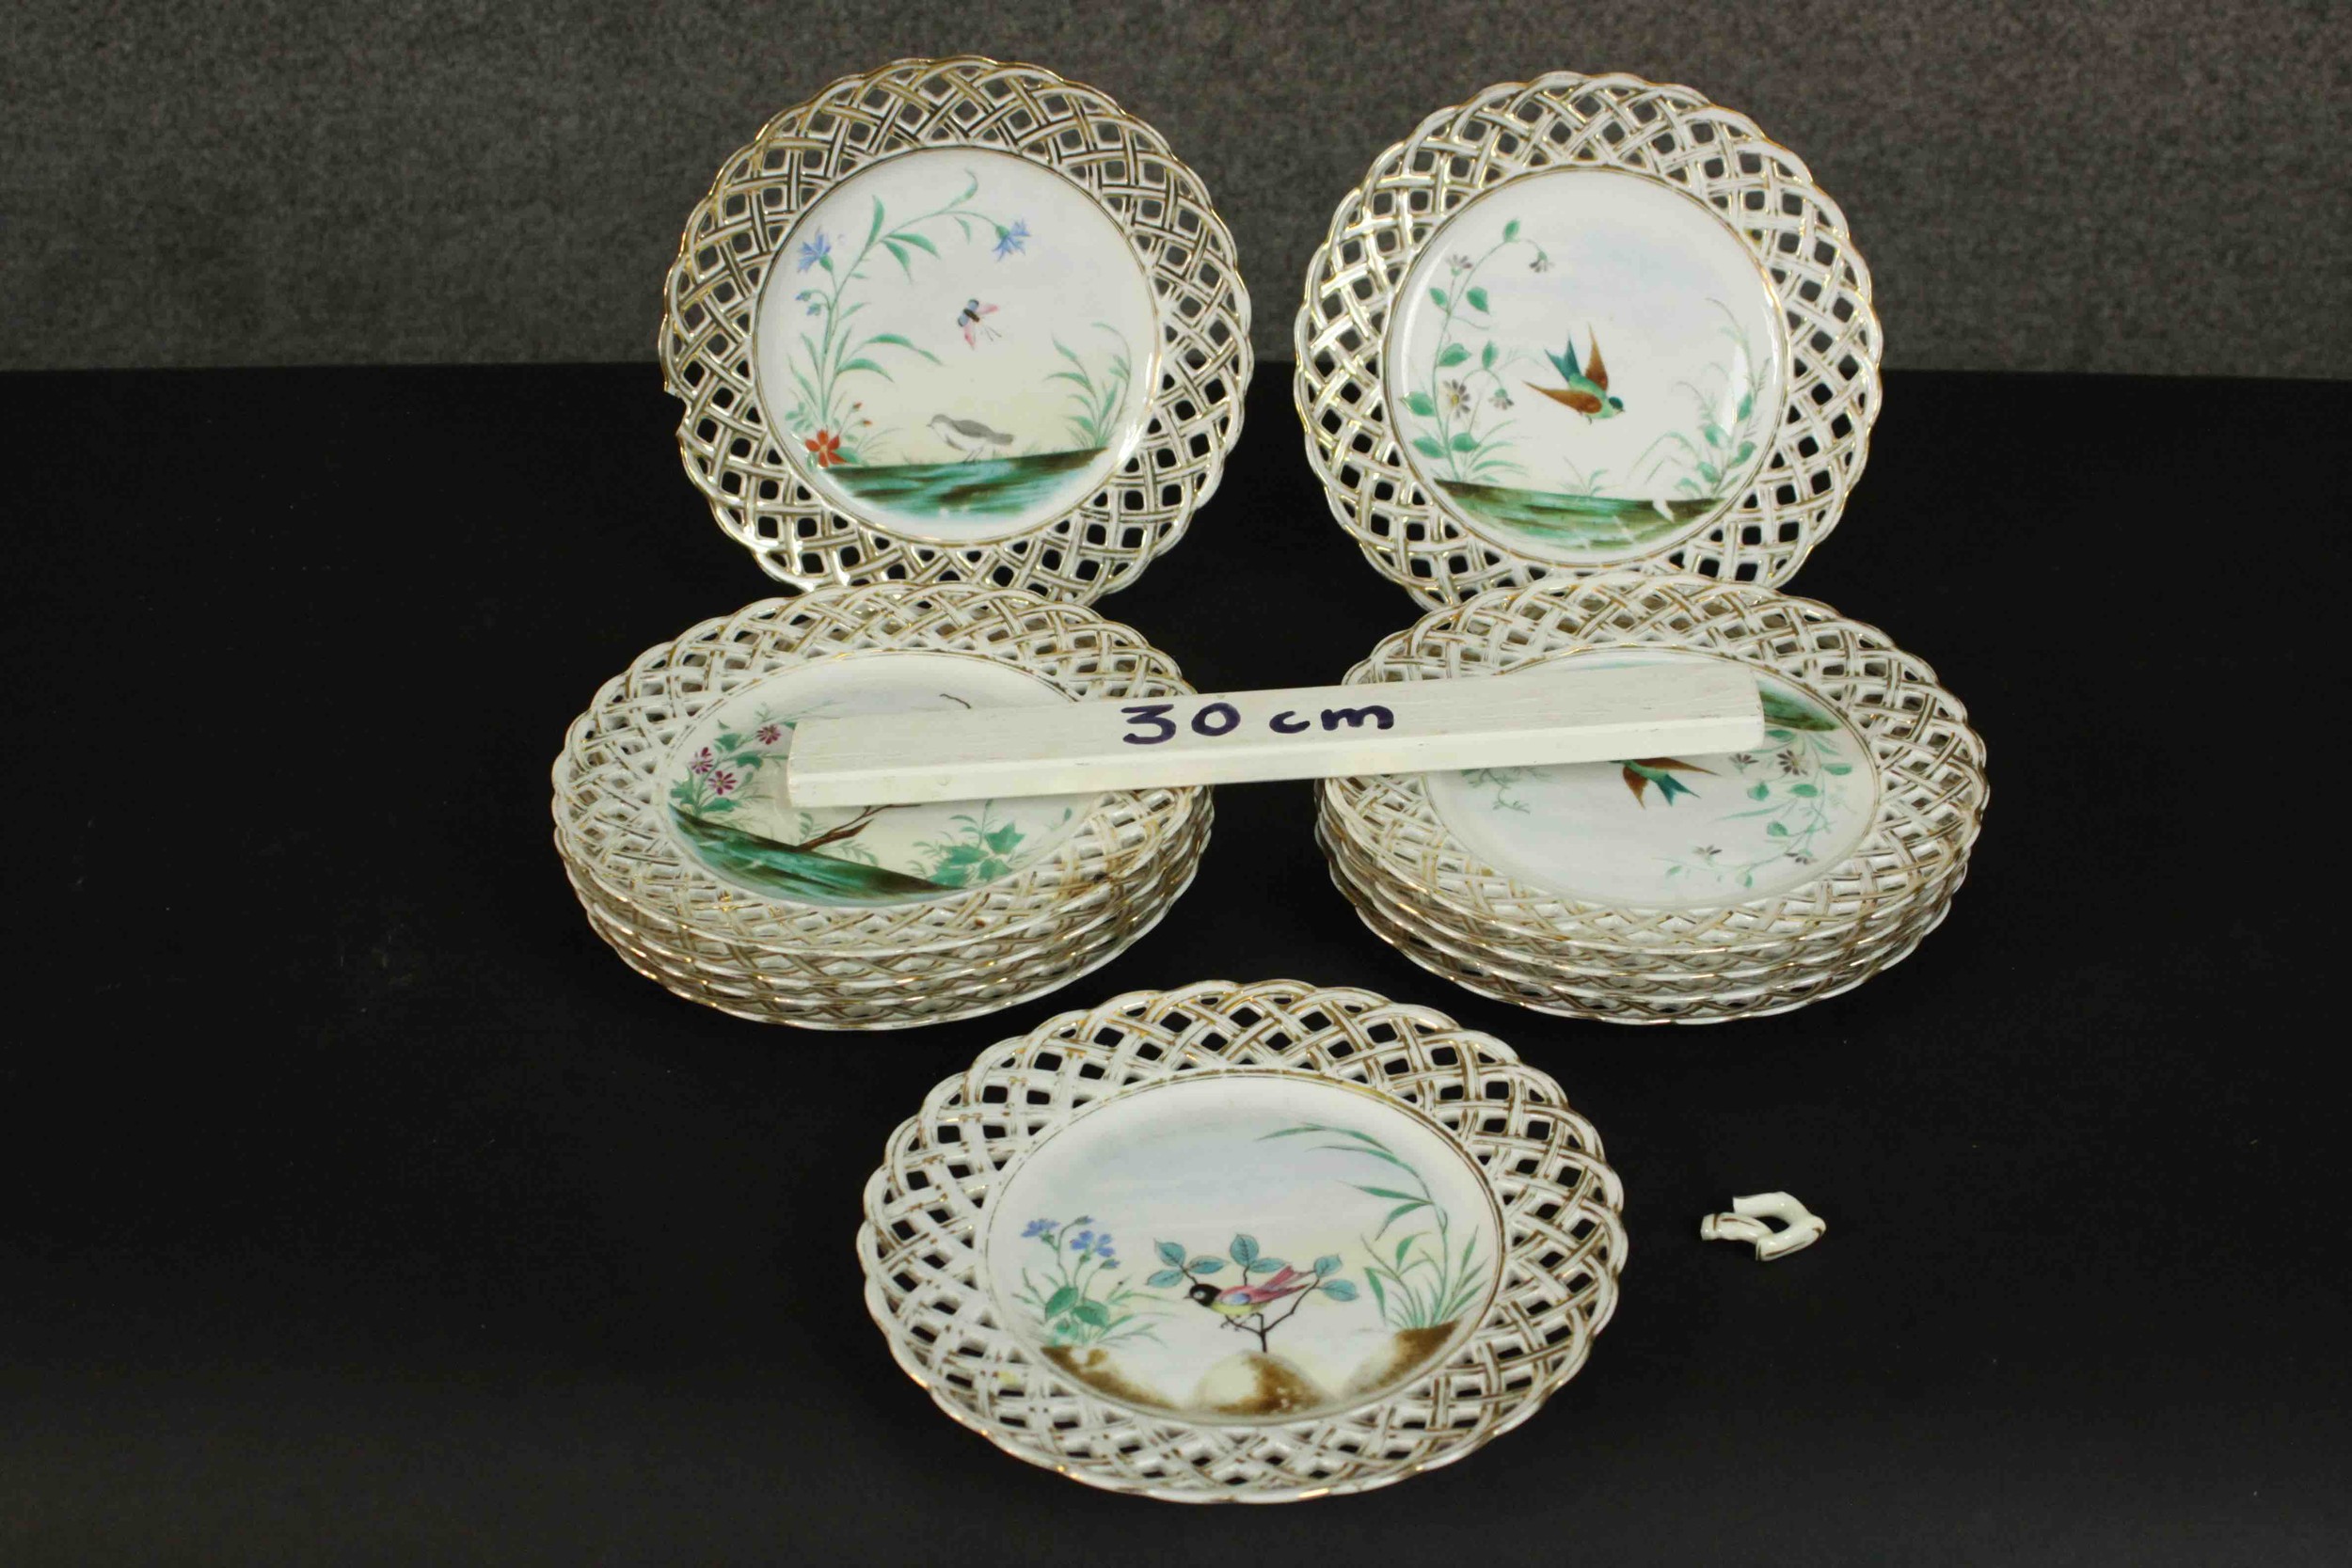 A set of eleven 19th century hand painted porcelain plates with pierced gilded lattice work rims and - Image 2 of 6